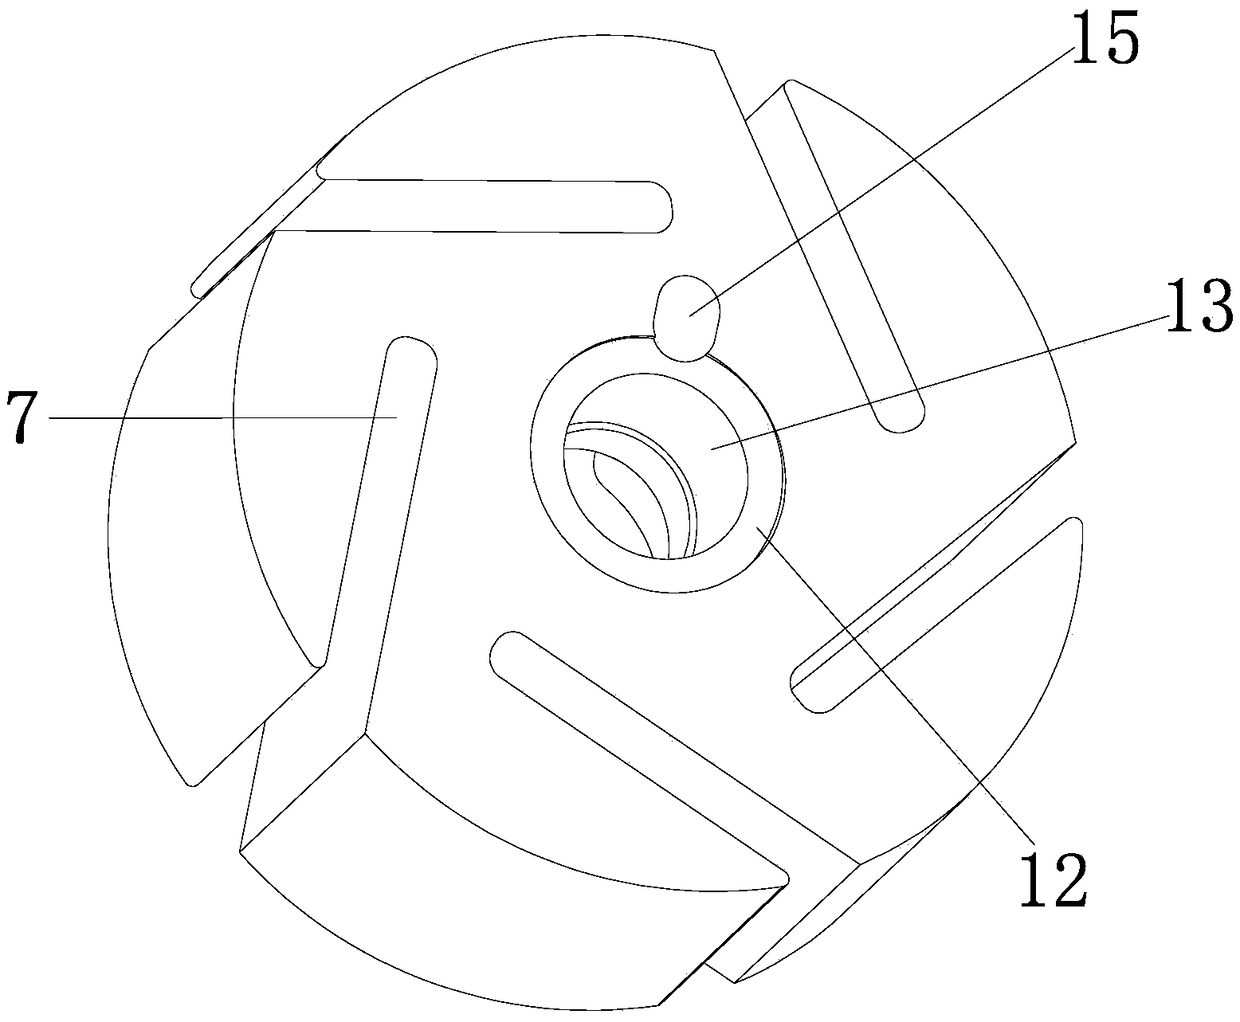 A processing method of graphite vane pump rotor and its special fixture